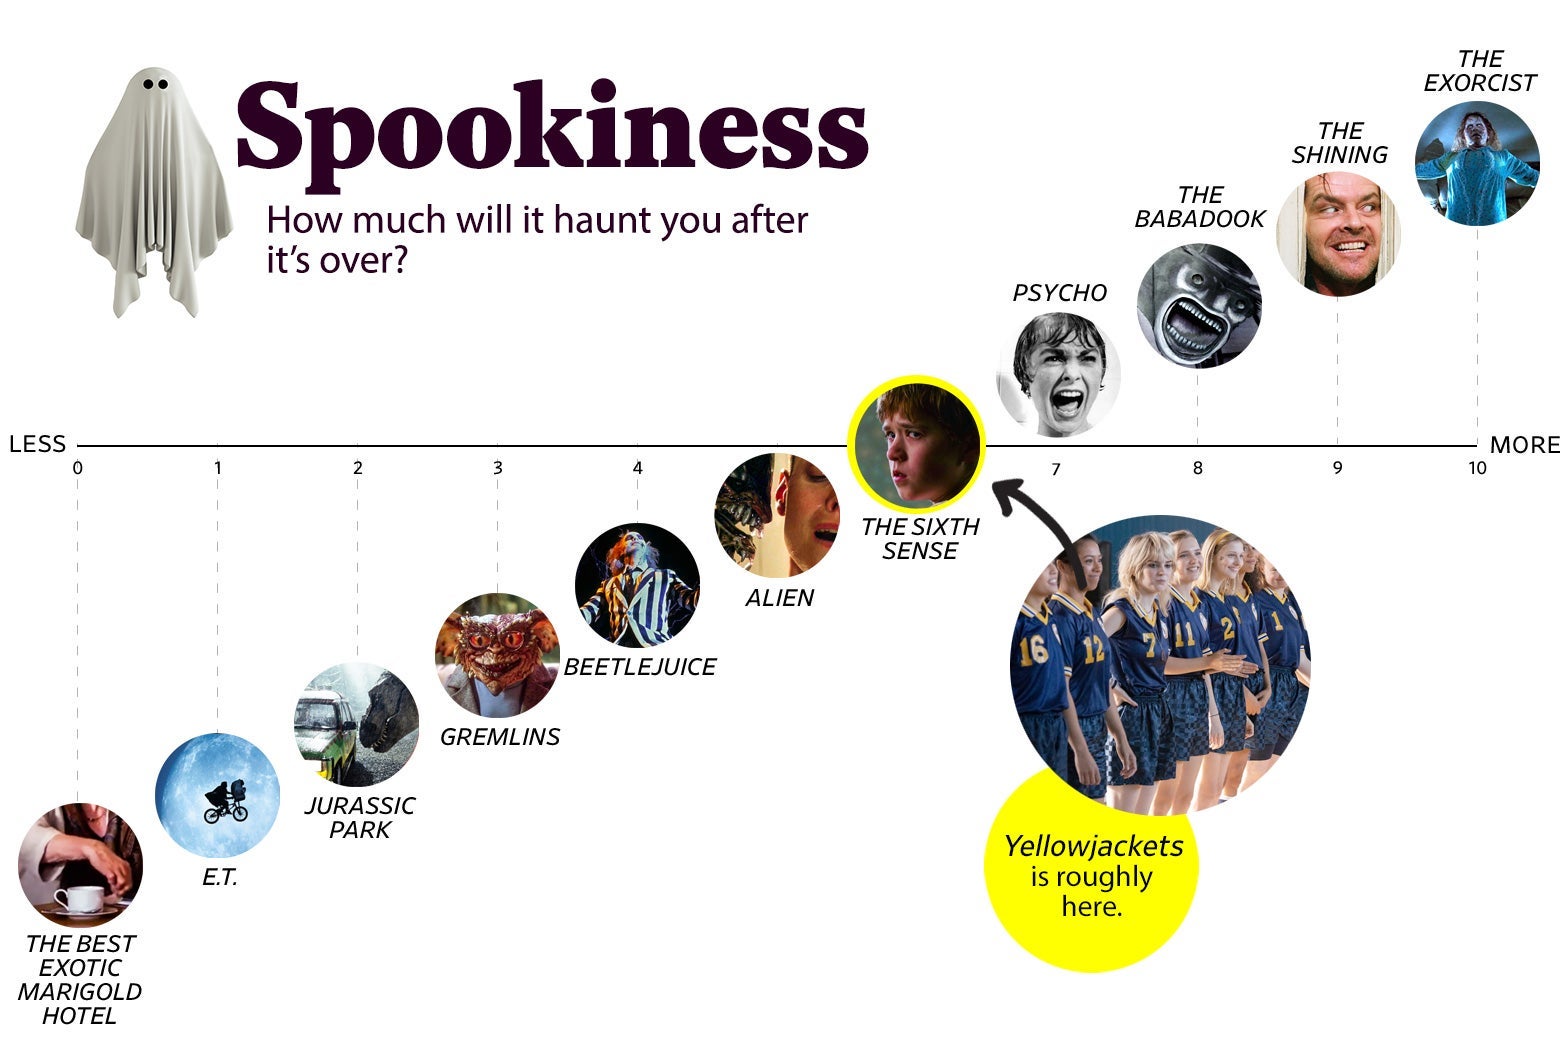 A chart that gives Yellowjackets a 6 for spookiness, about equal to The Sixth Sense.